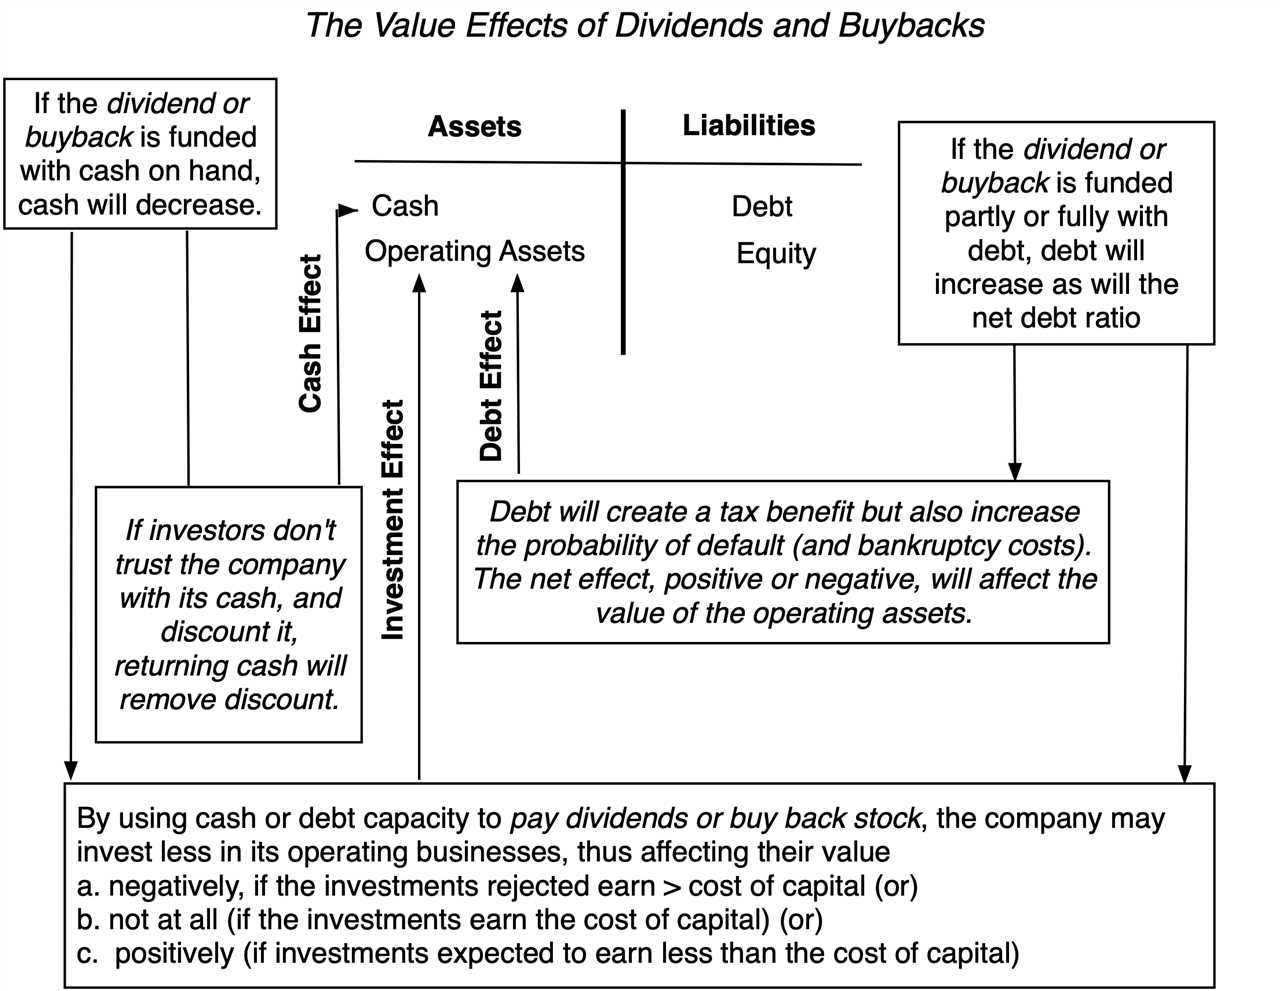 What is a Leveraged Buyback?